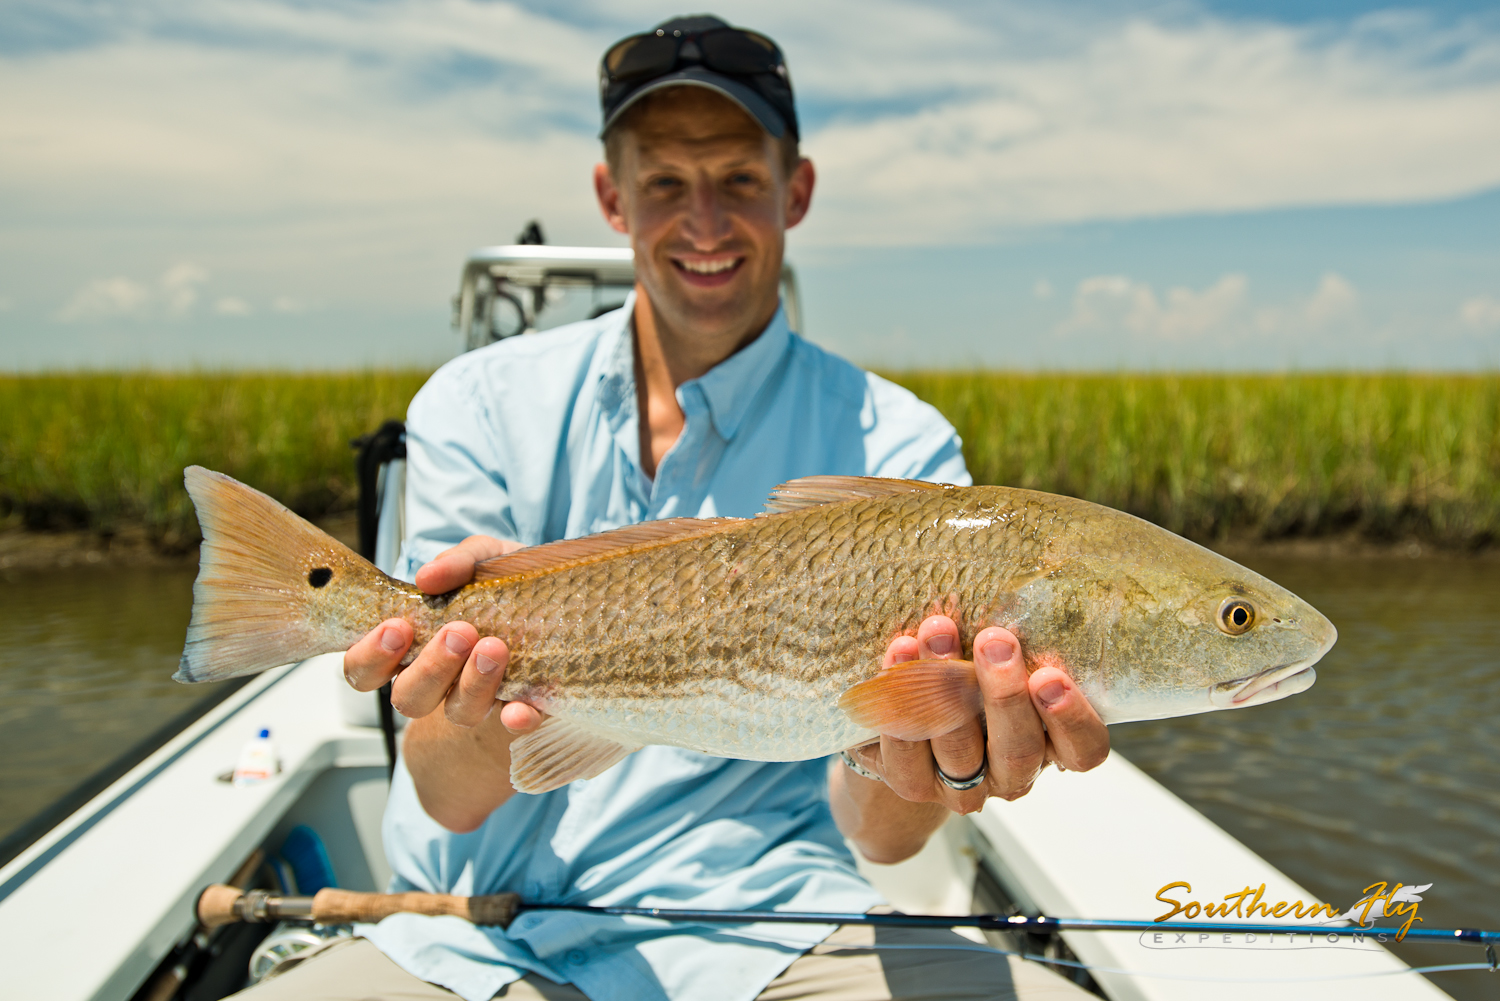 2016-08-24-Southern-Fly-Expeditions-JeffWeiss-David-1.jpg